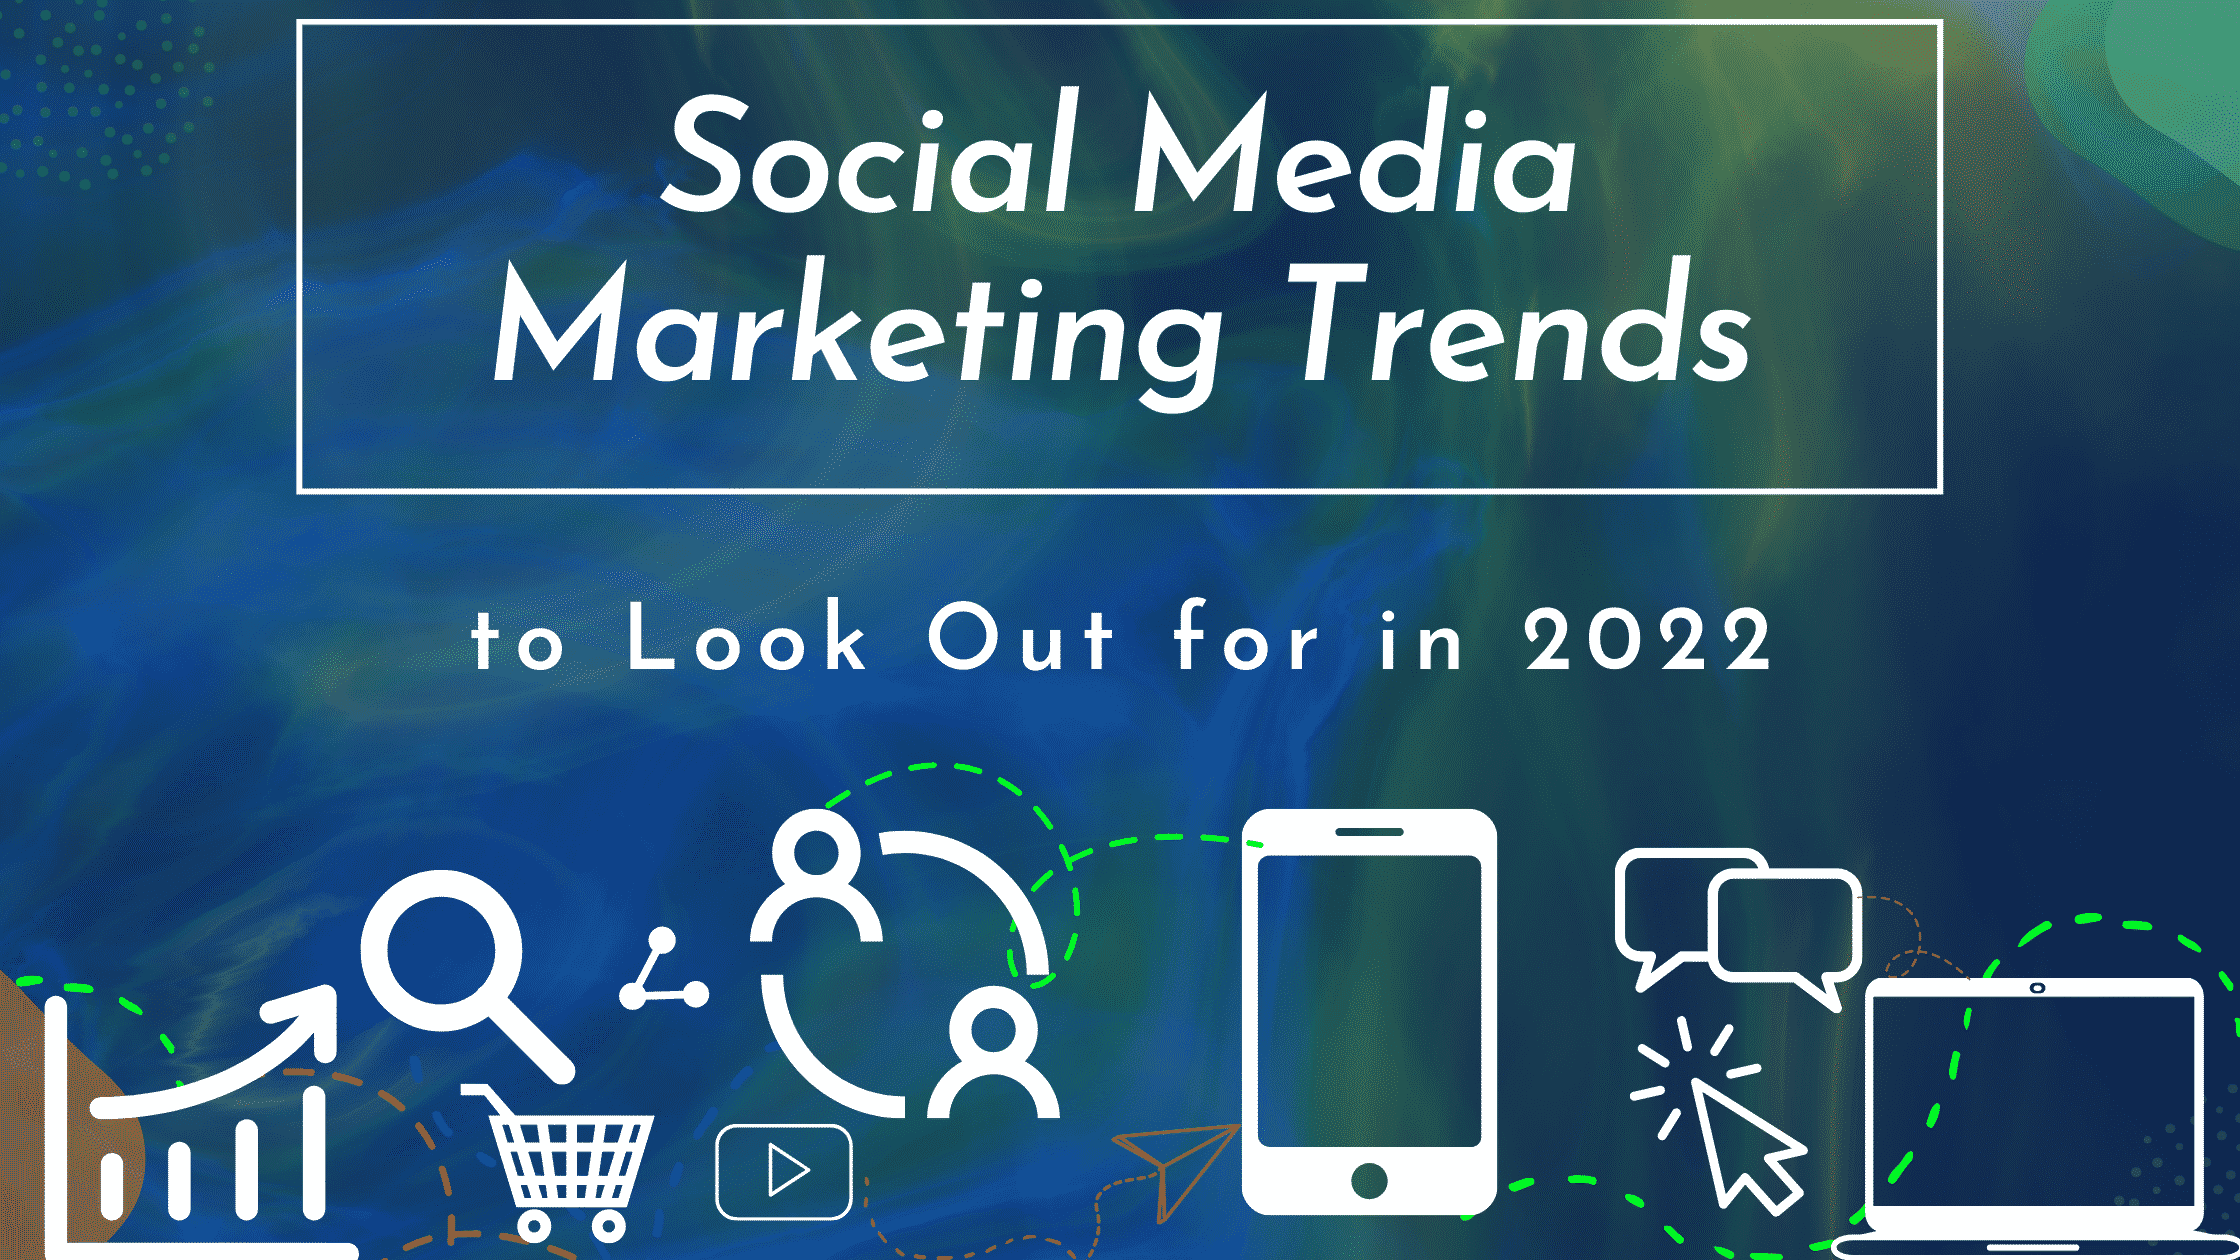 social media marketing trends to look out for in 2022 - eclincher